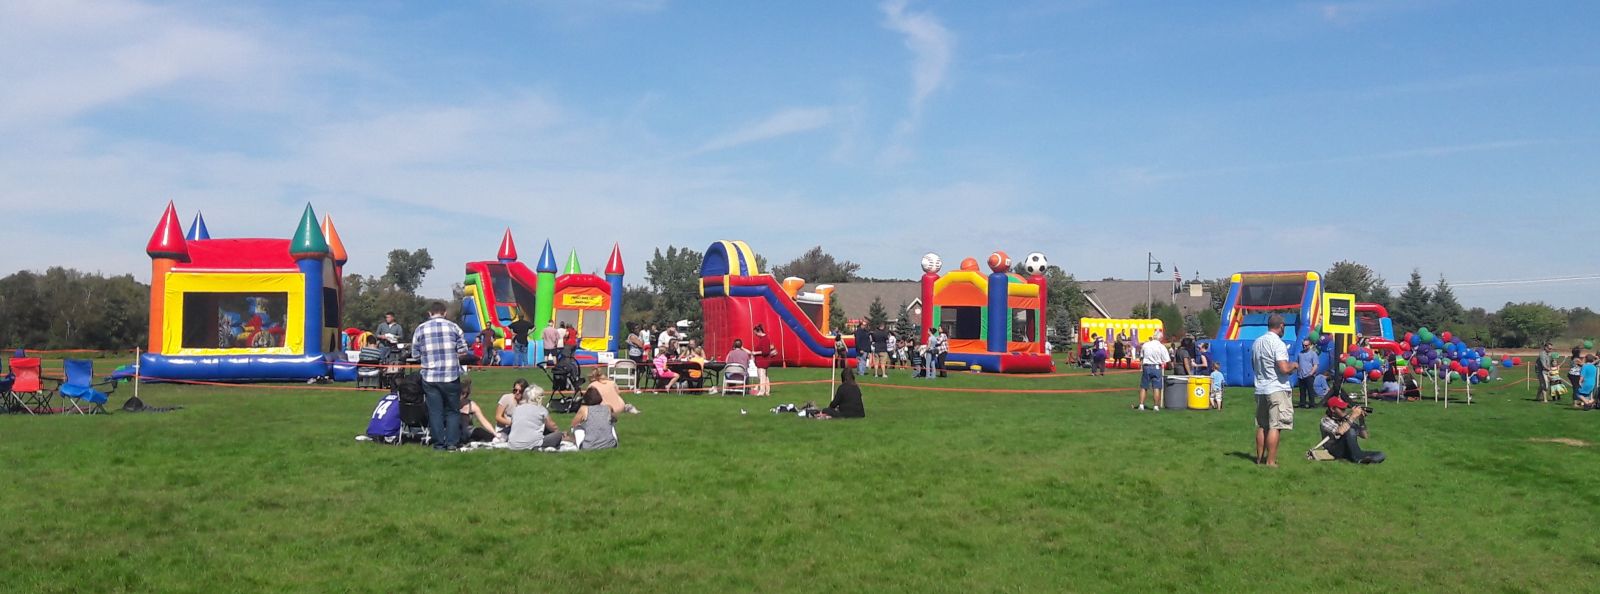 Giant inflatable slide, bounce house, combo, and other inflatables at a church field event.